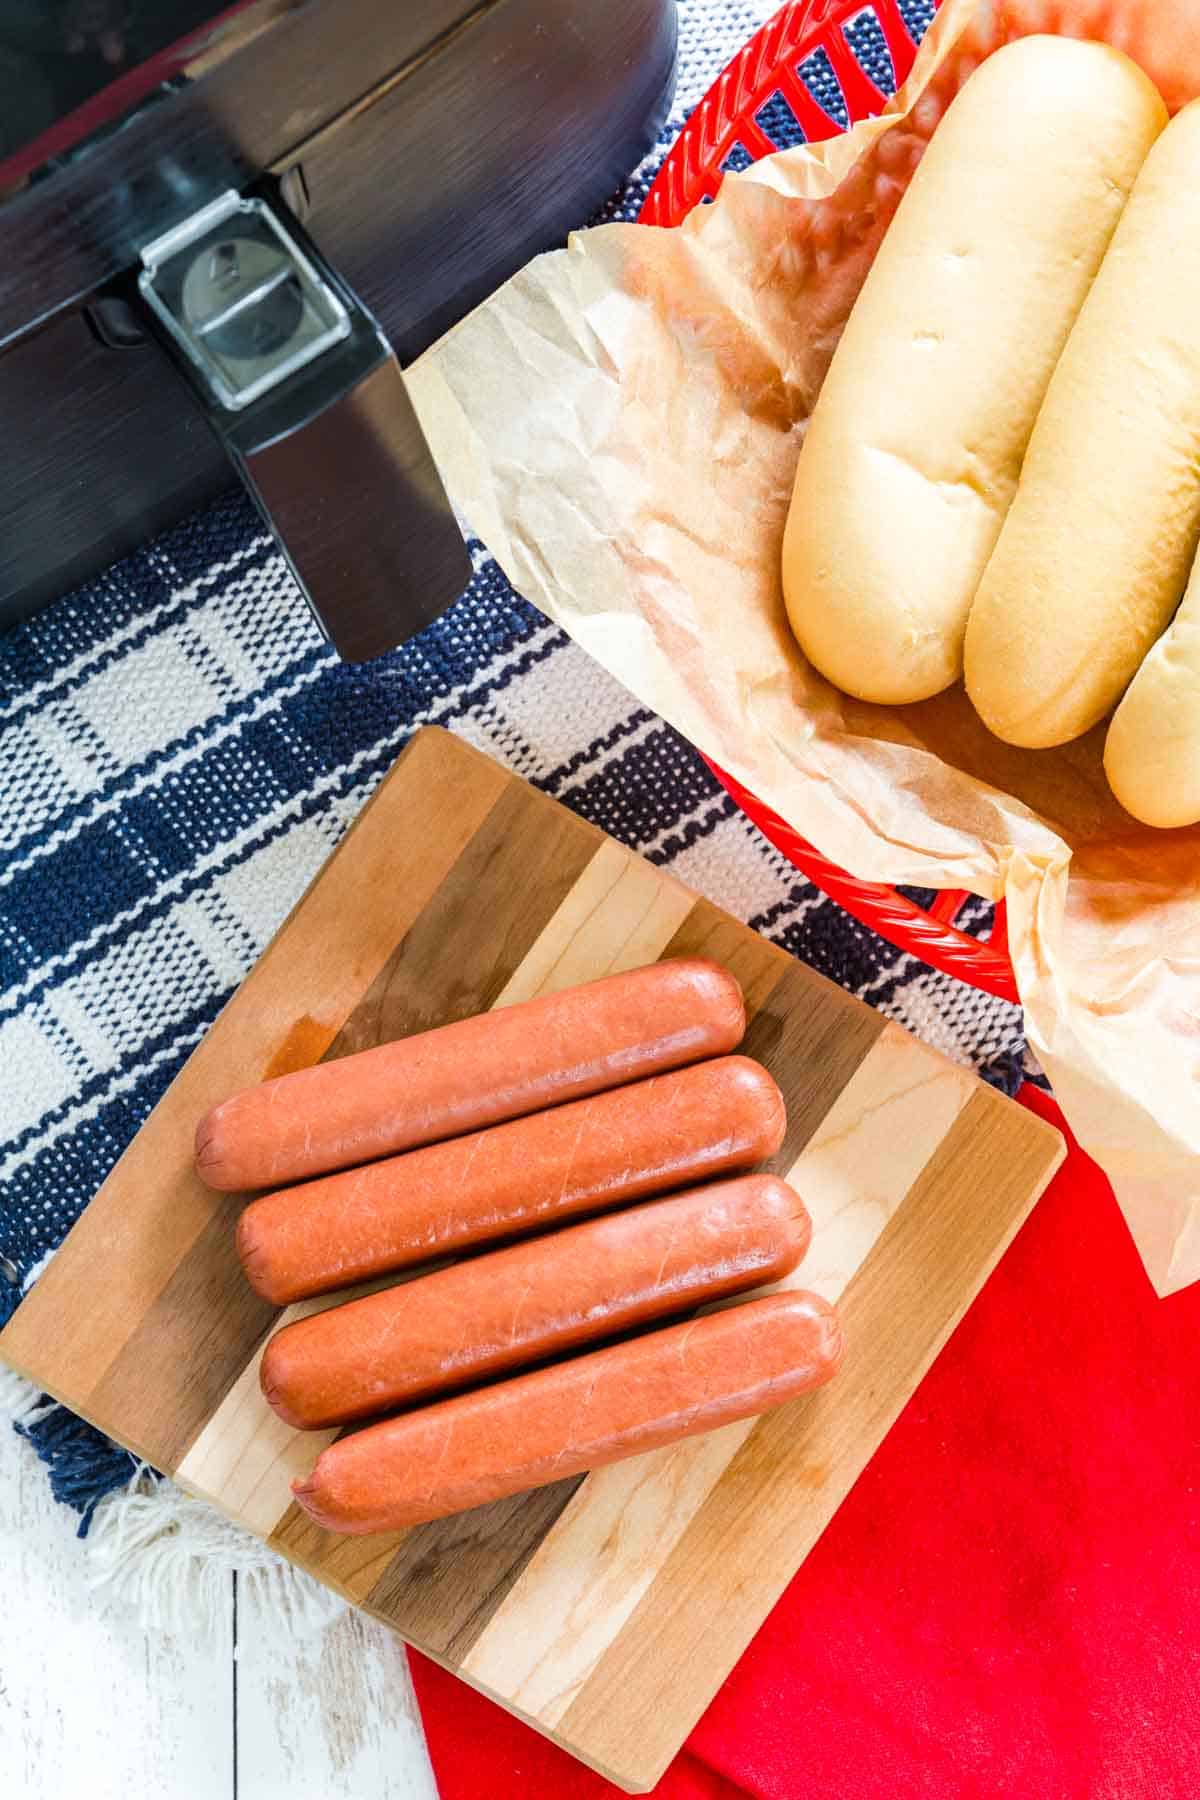 Ingredients needed for air fryer hot dogs - hot dogs and buns.